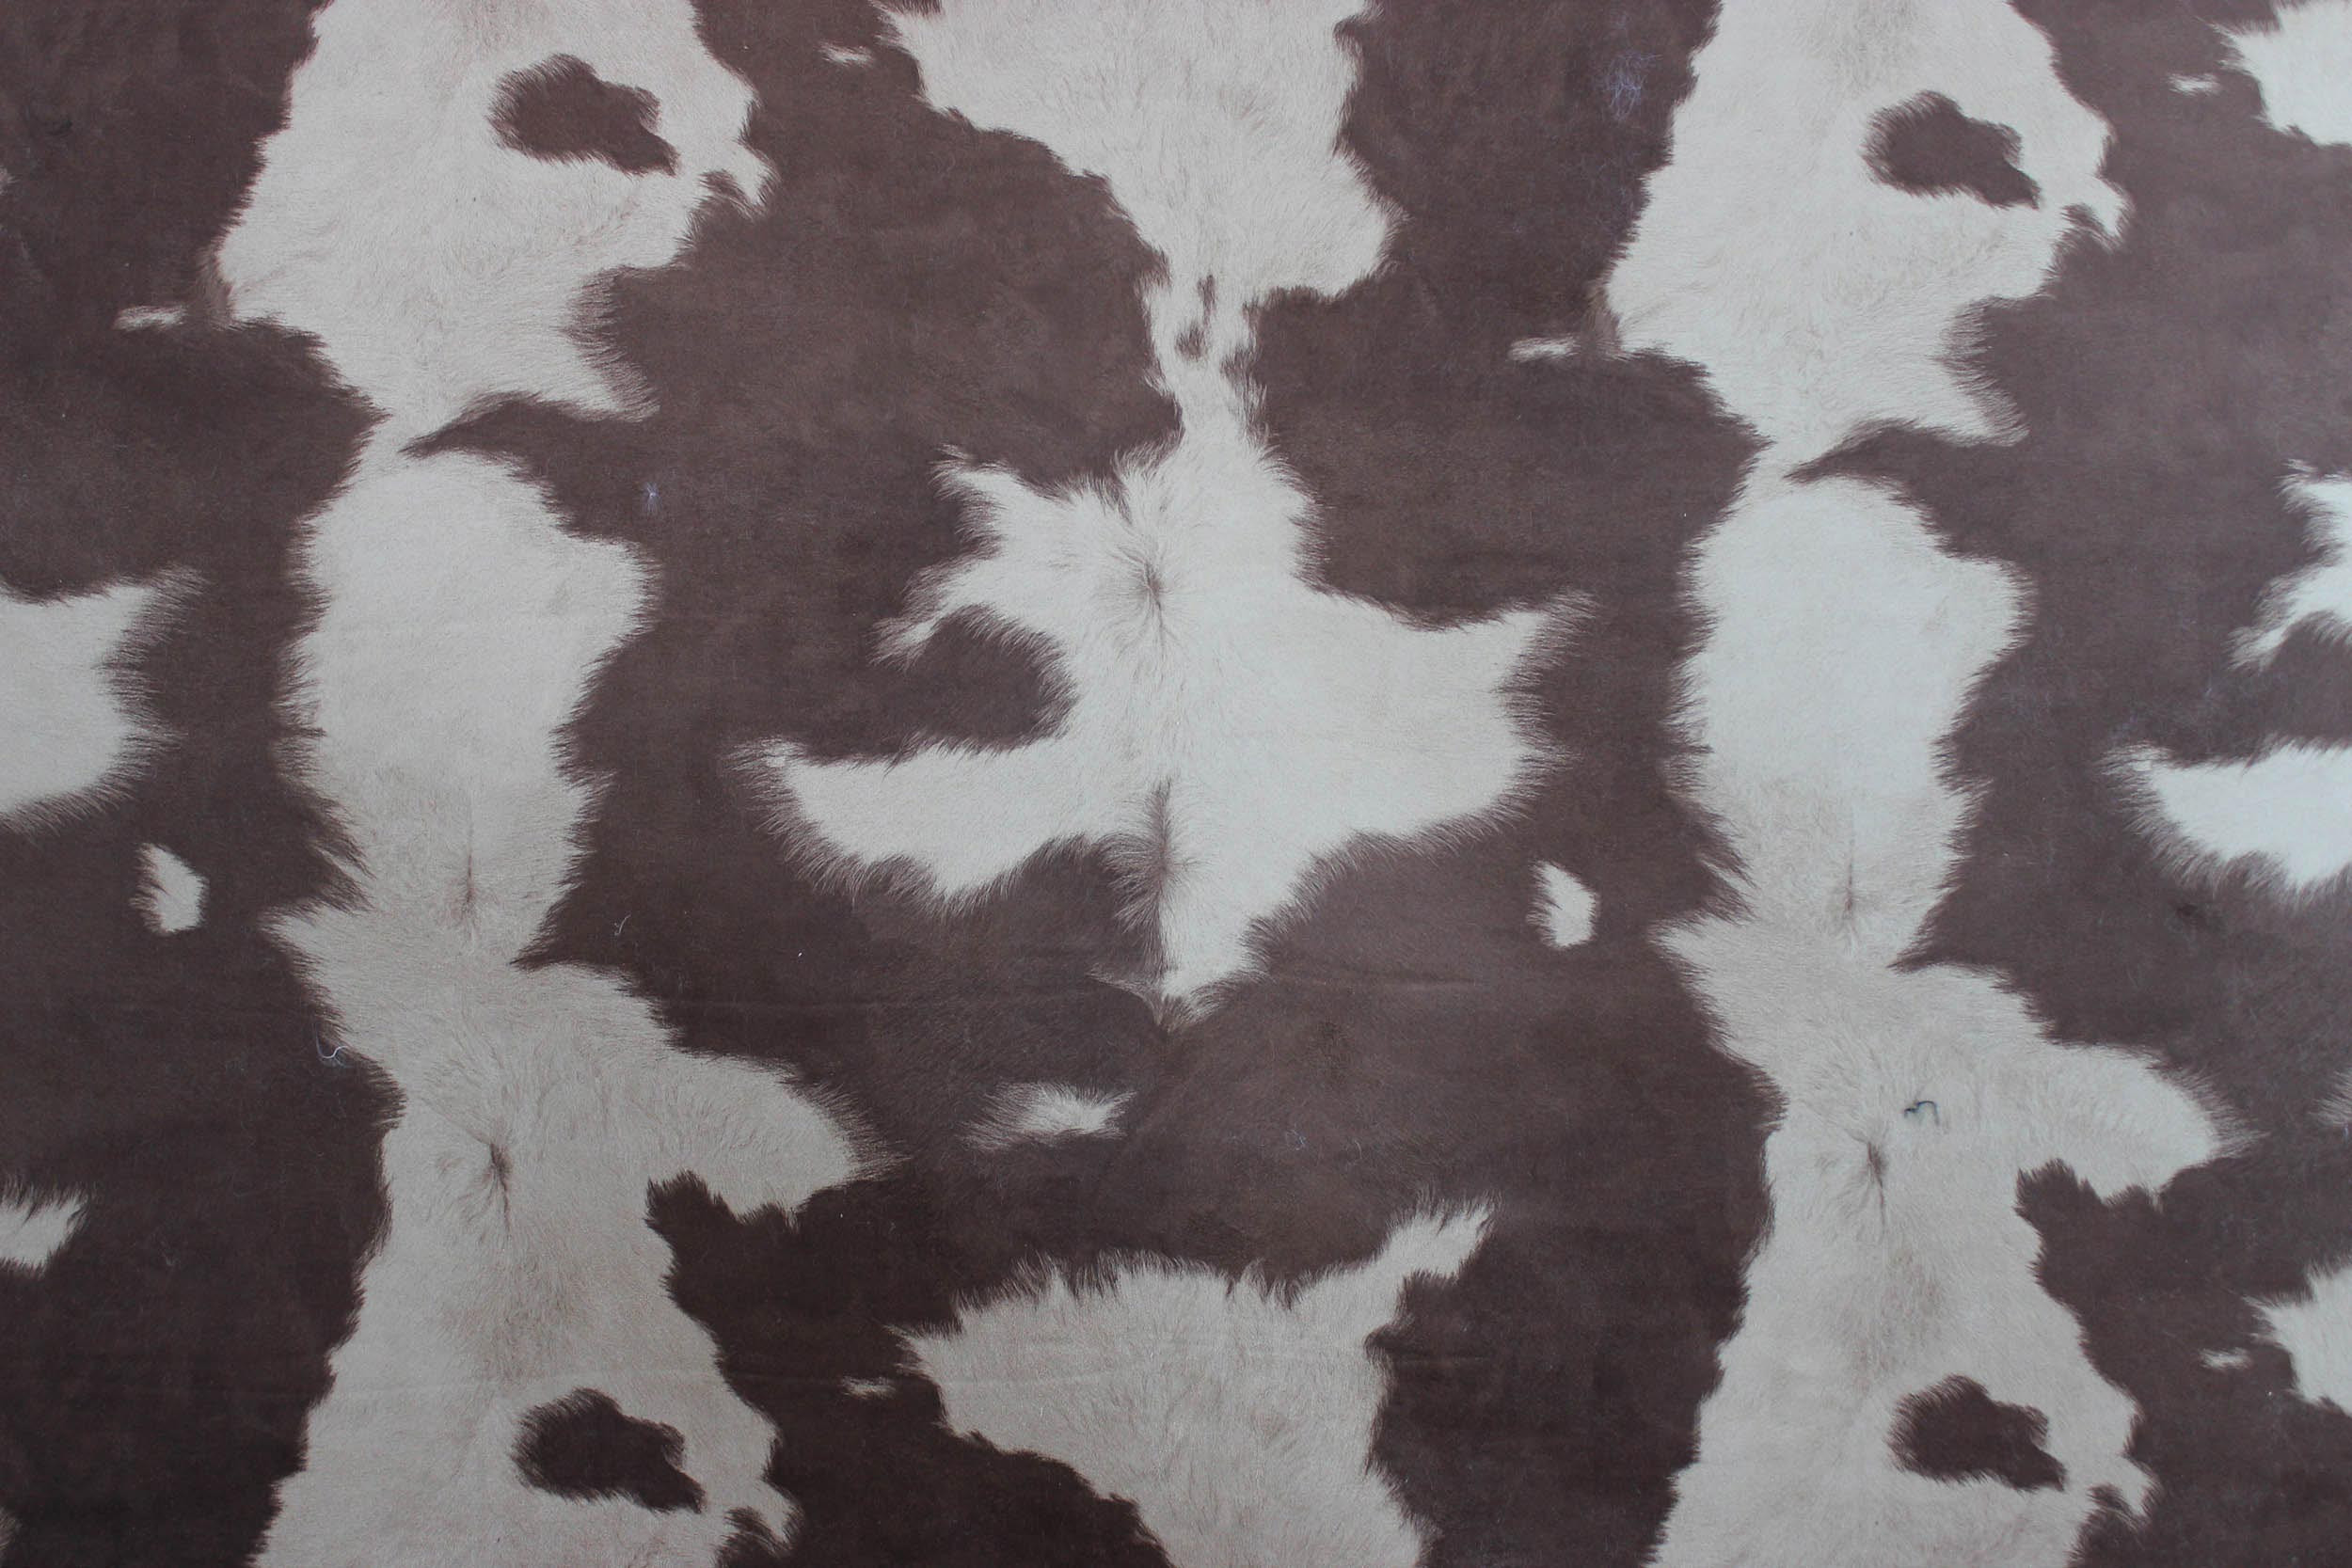 Cowhide Brown/Camel -The Fabric Mill